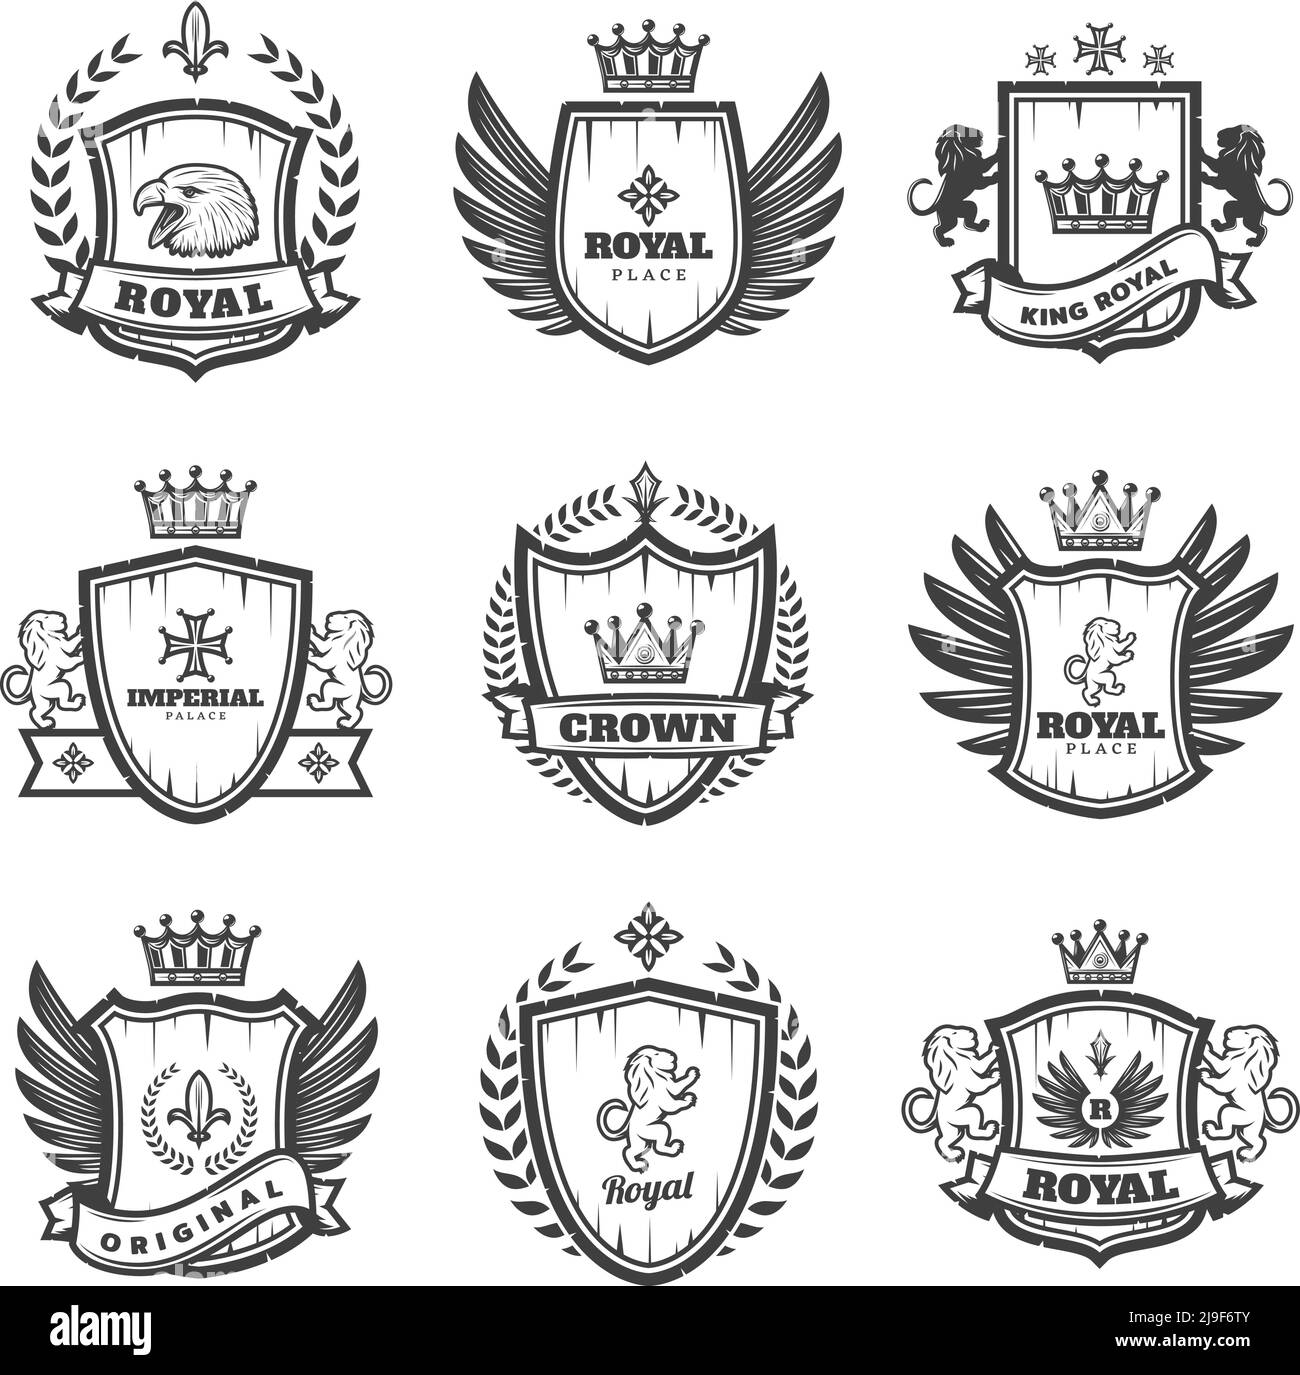 Vintage monochrome heraldic emblems set with ornate coats of arms and medieval blazons isolated vector illustration Stock Vector